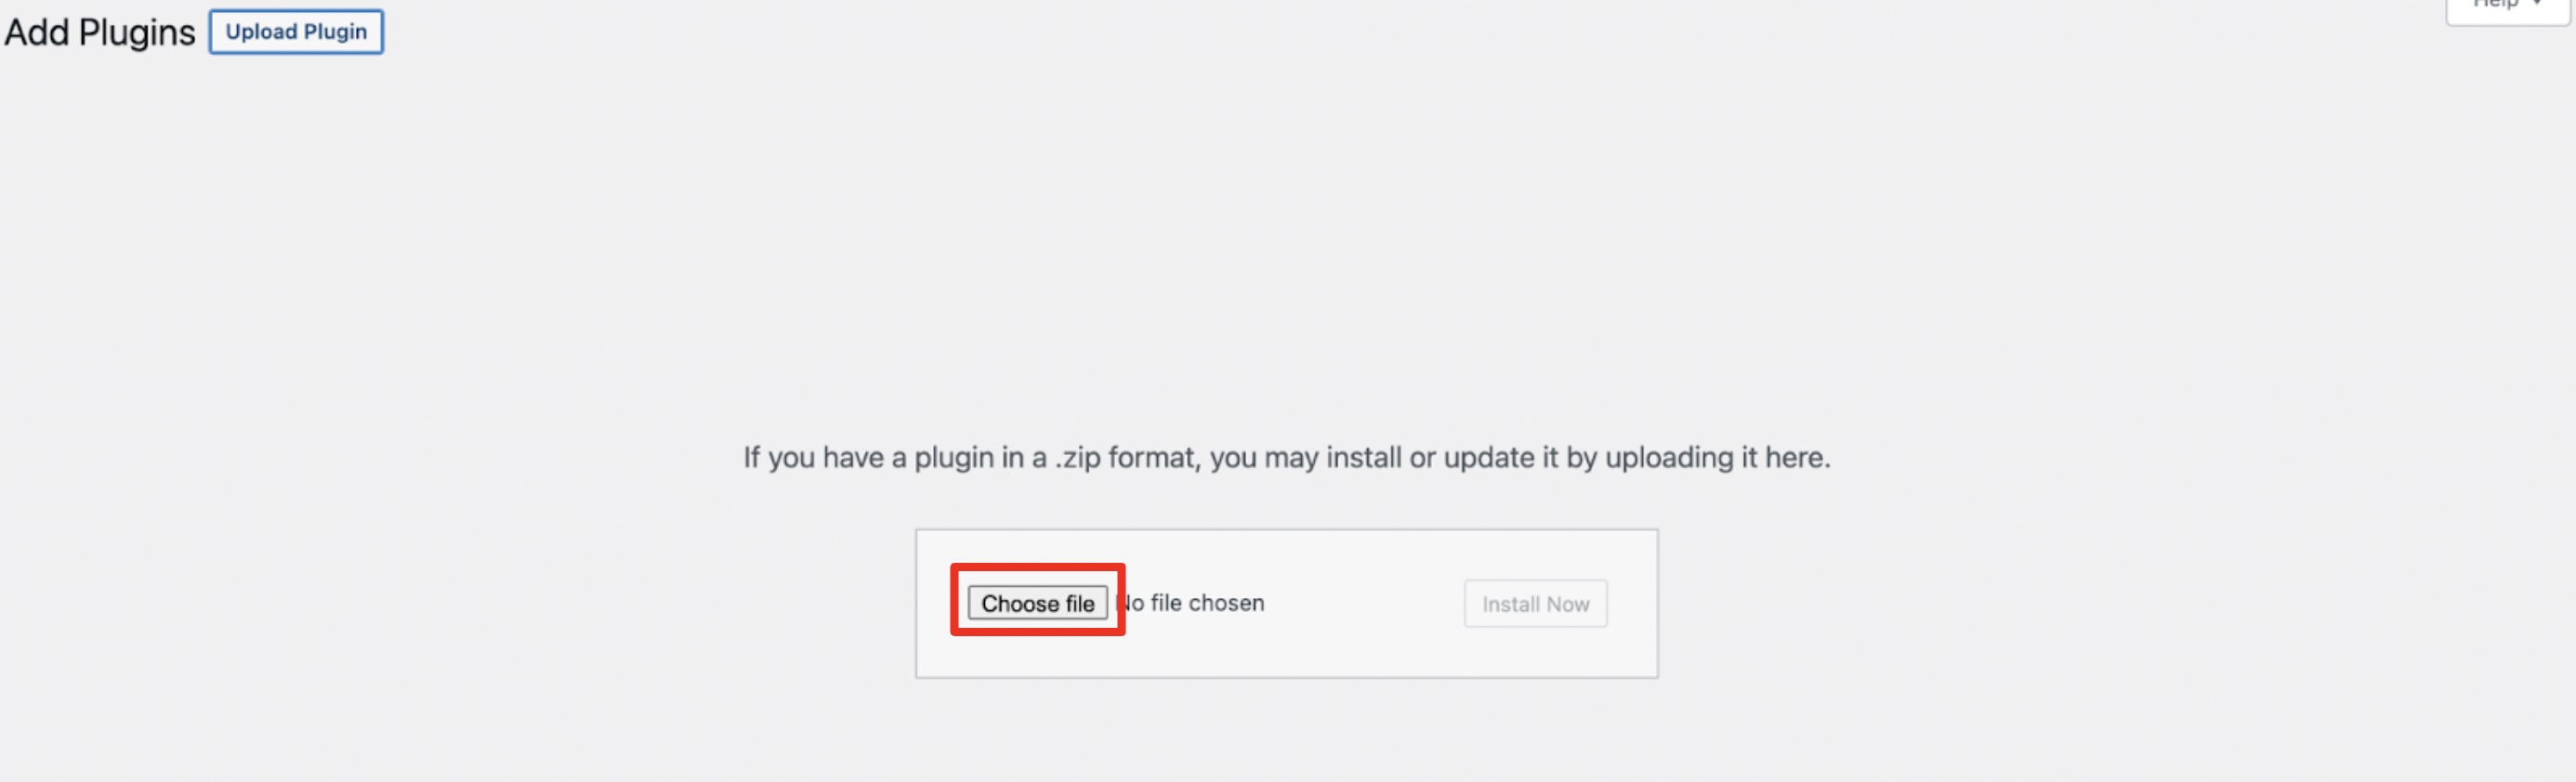 Screenshot showing how to upload the Two plugin